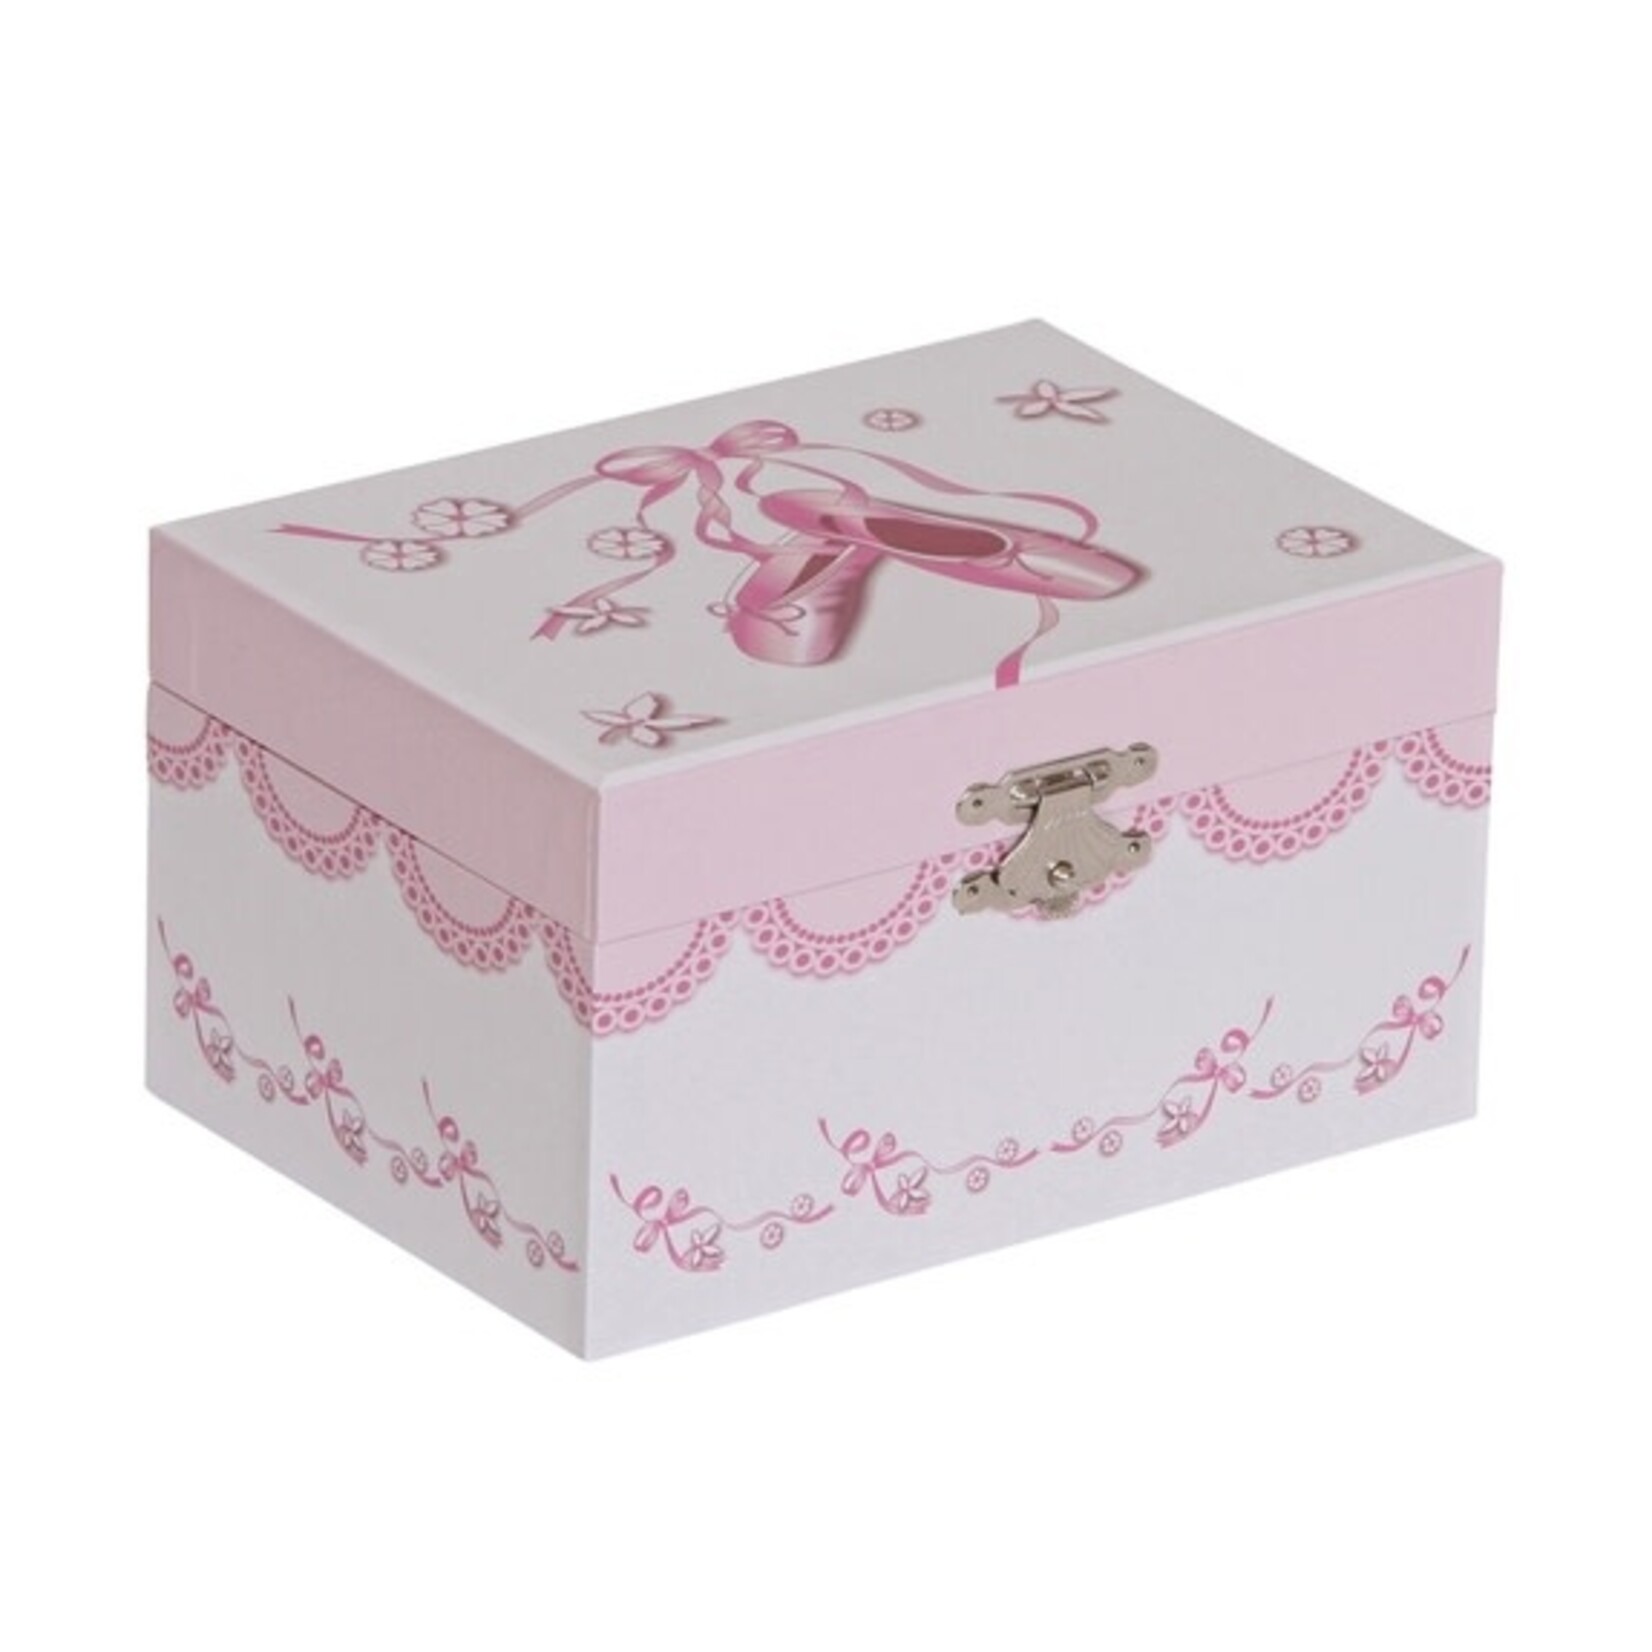 Mele and Co Mele and Co Clarice Musical Ballerina Jewelry Box Waltz Flowers